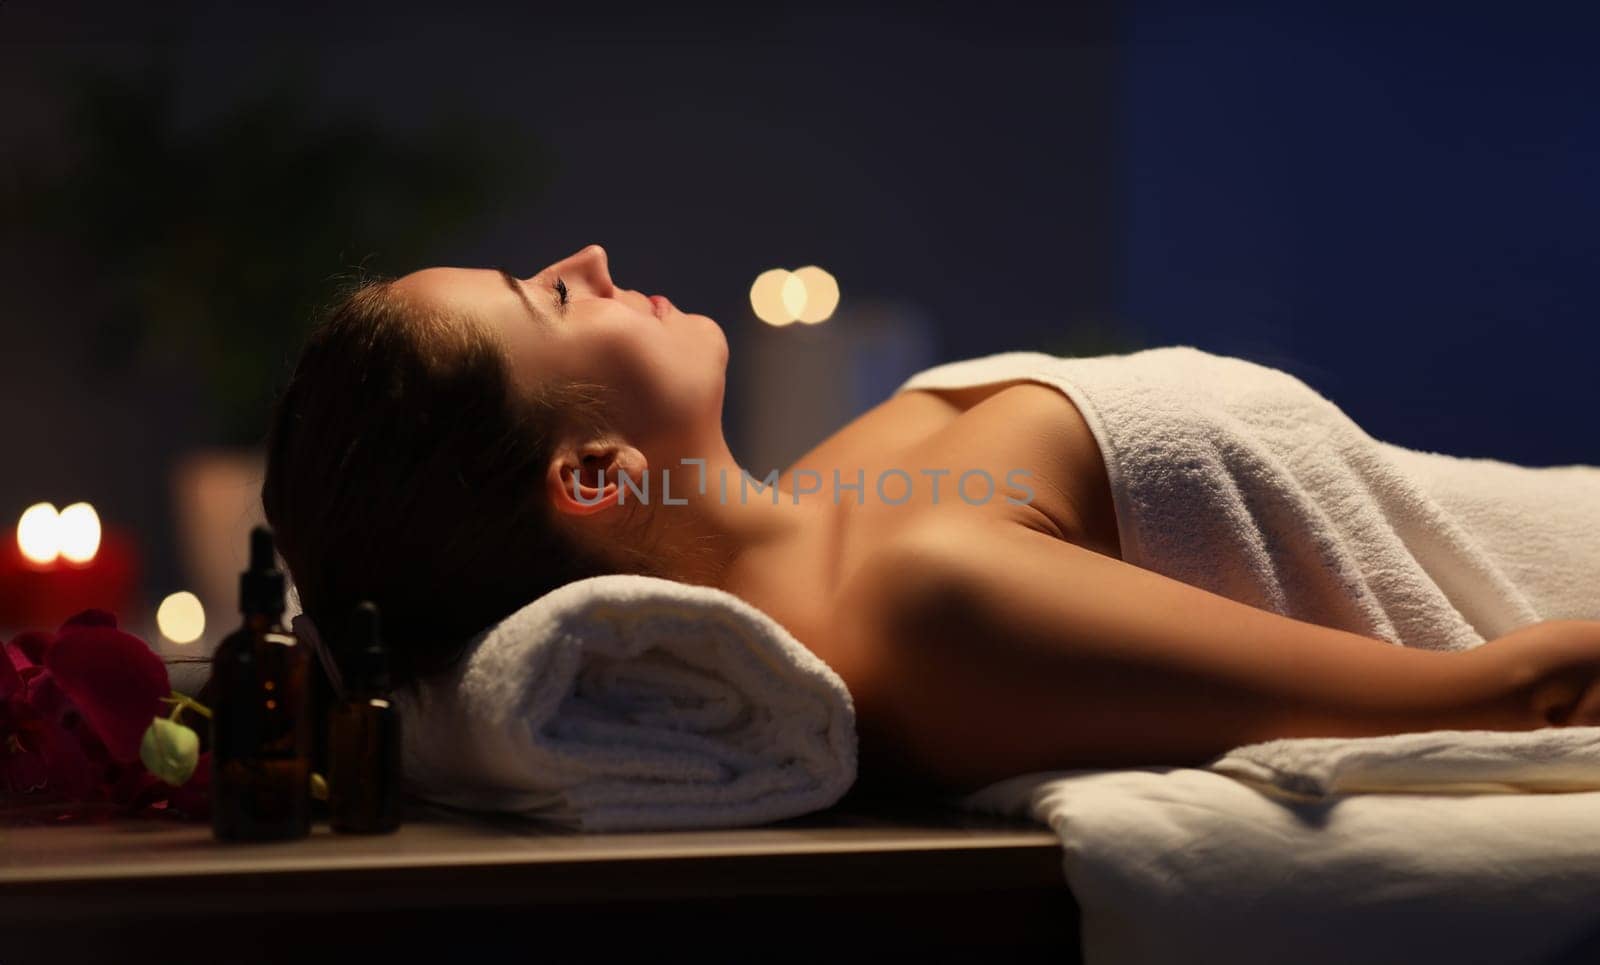 Portrait of relaxed girl lay with closed eyes on massage table in spa, wait for procedure to begin. Full relaxation in luxury spa center. Wellness concept